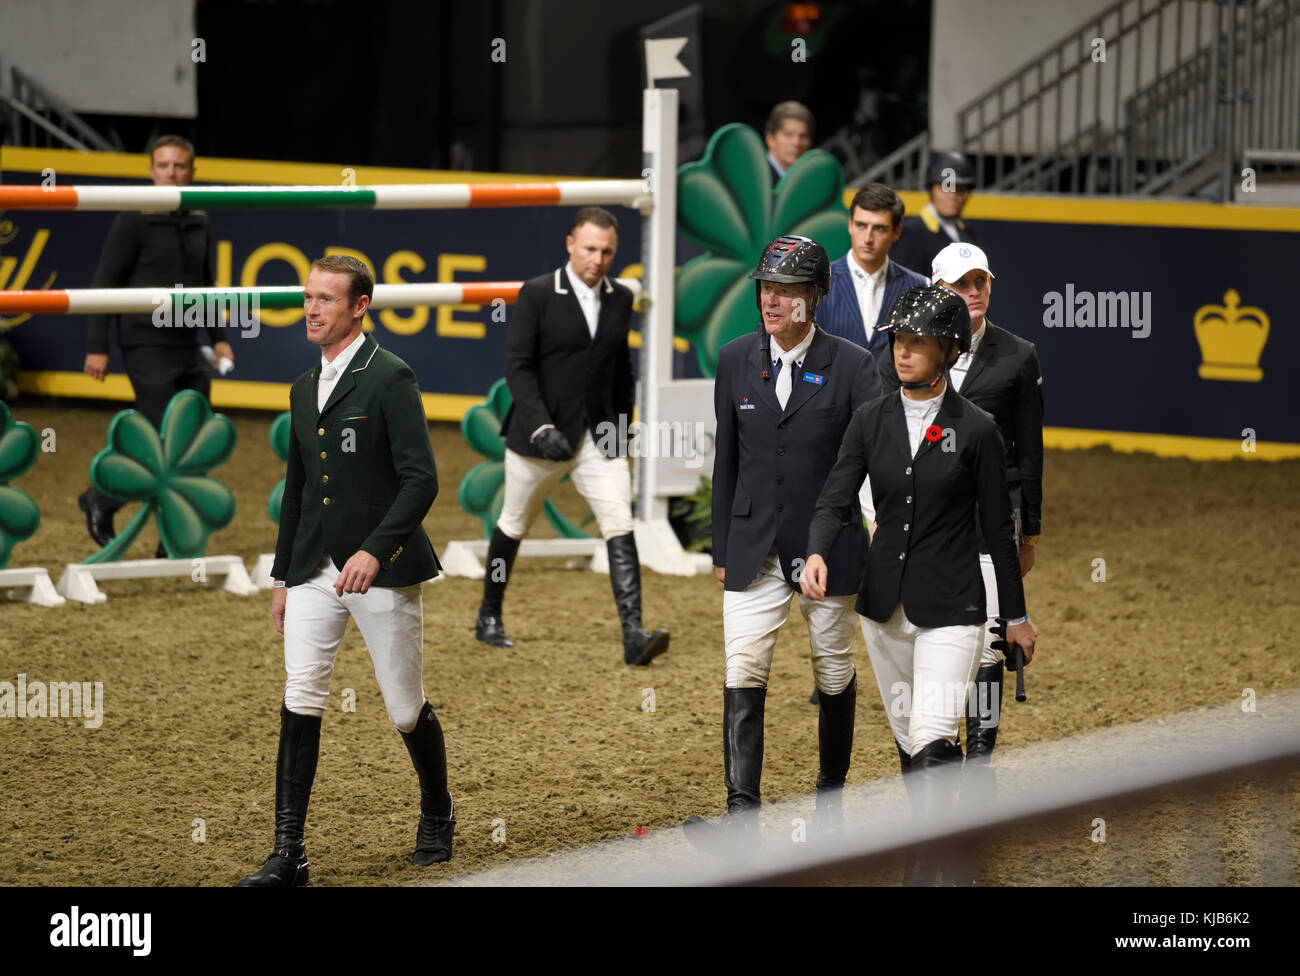 Richie Moloney, Sharn Wordley, Ian Miller, Nicola Philippaerts, Amy Miller, Daniel Coyle, walking the course of Longines FEI World Cup Show Jumping Stock Photo